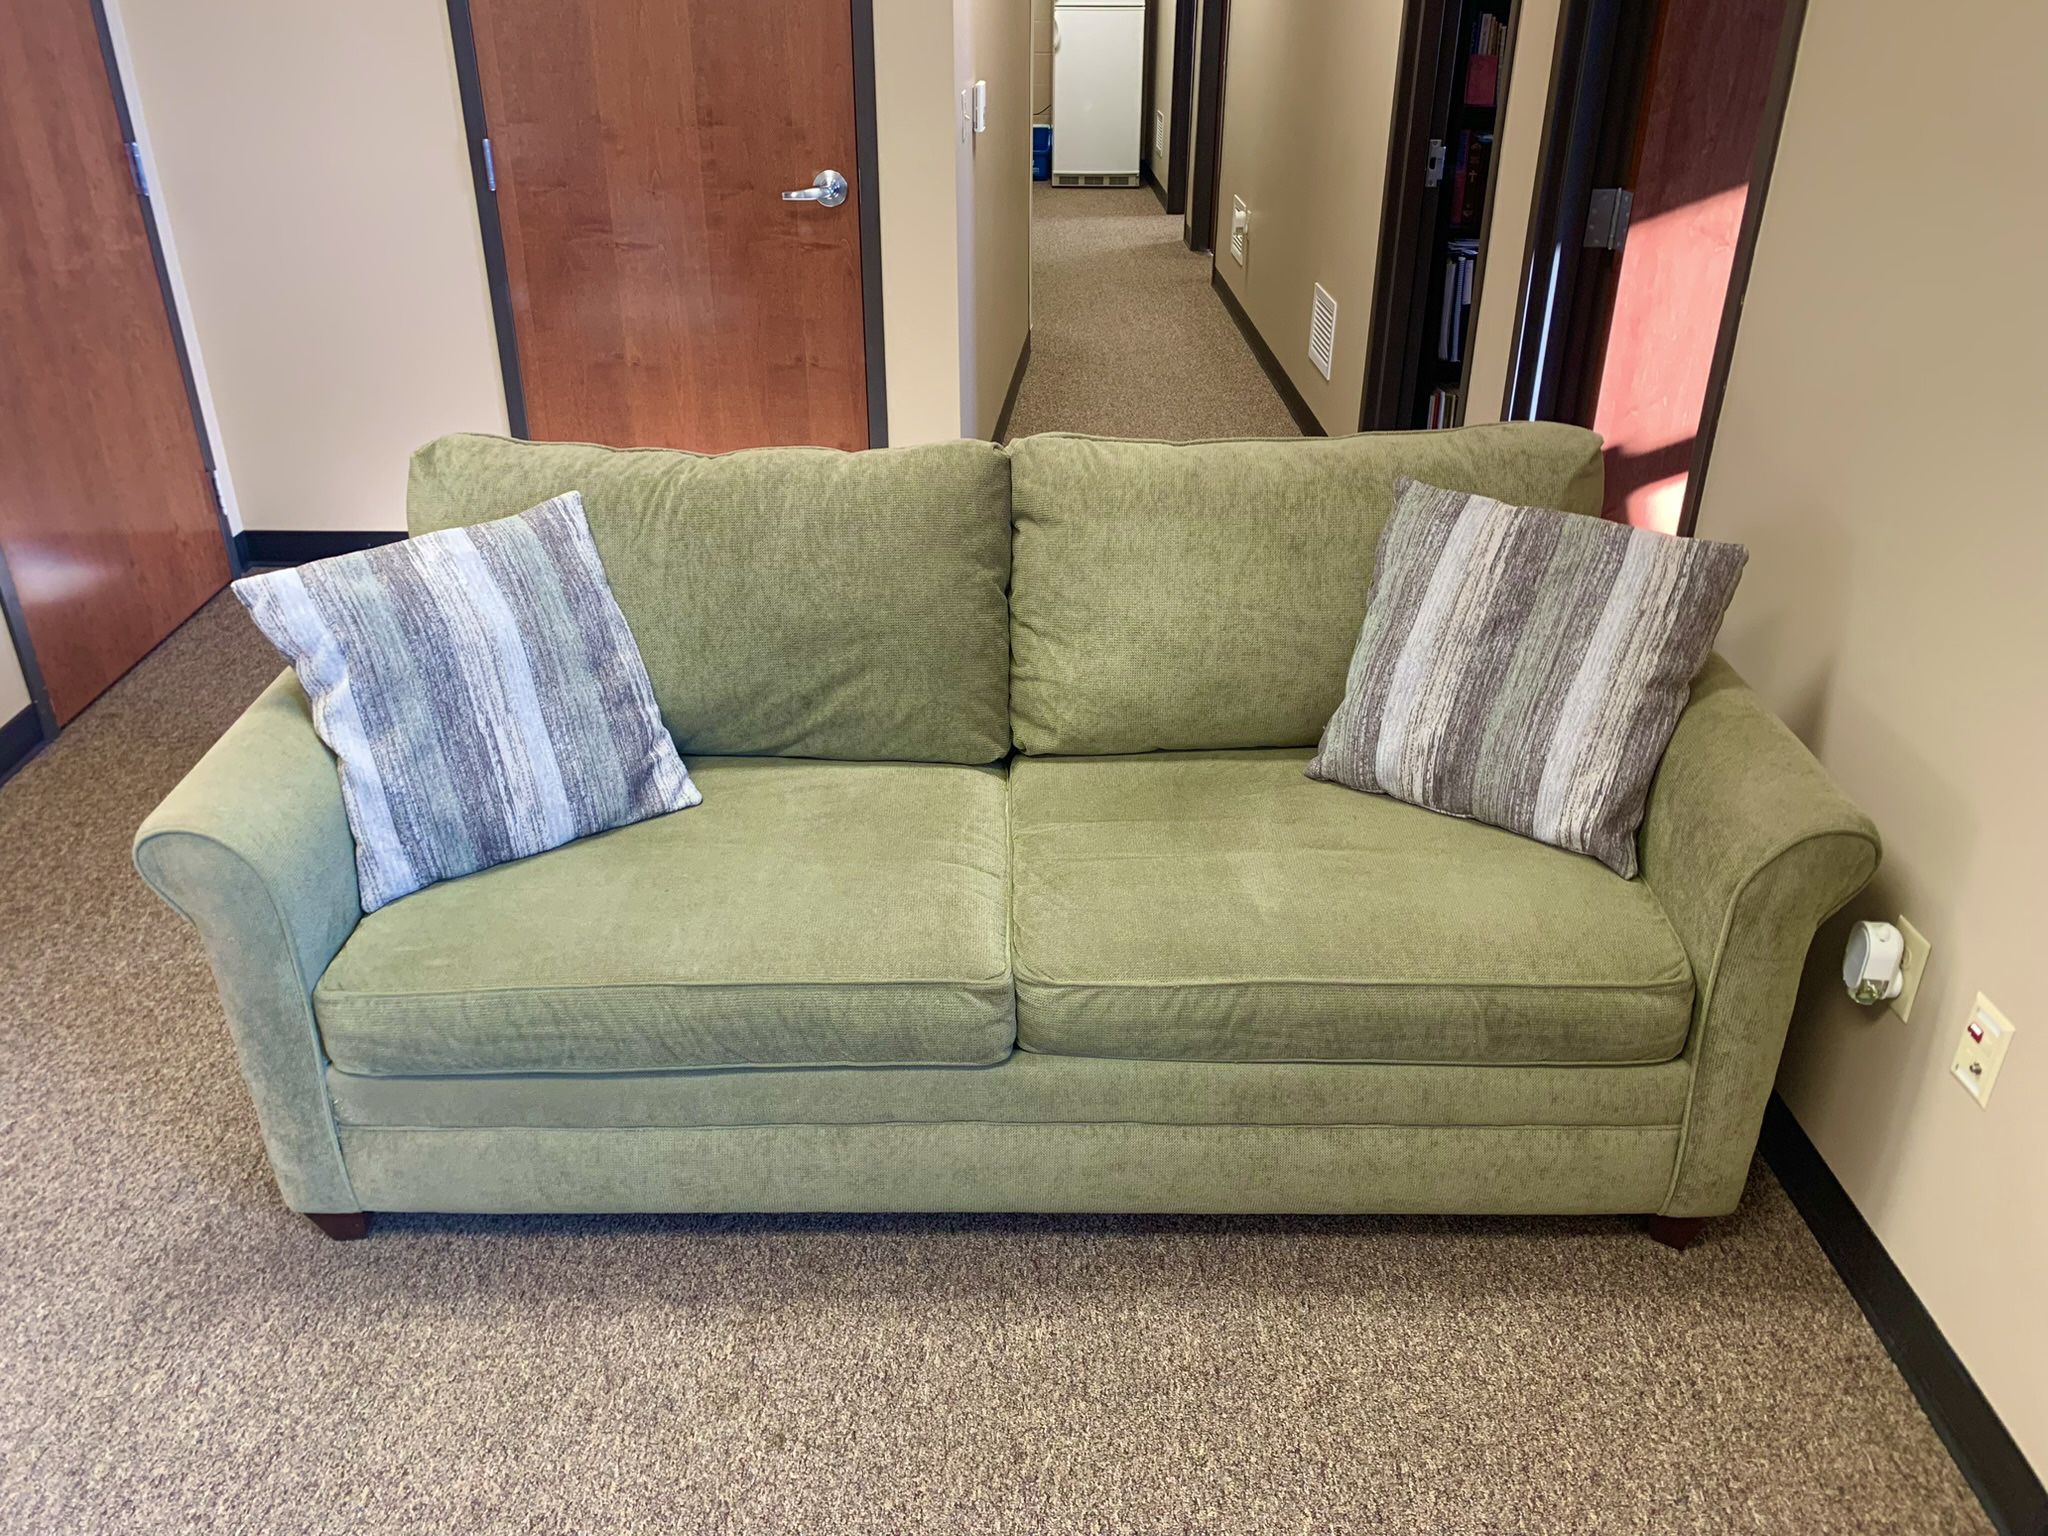 FREE DELIVERY! Olive Green Loveseat / Couch / Sofa